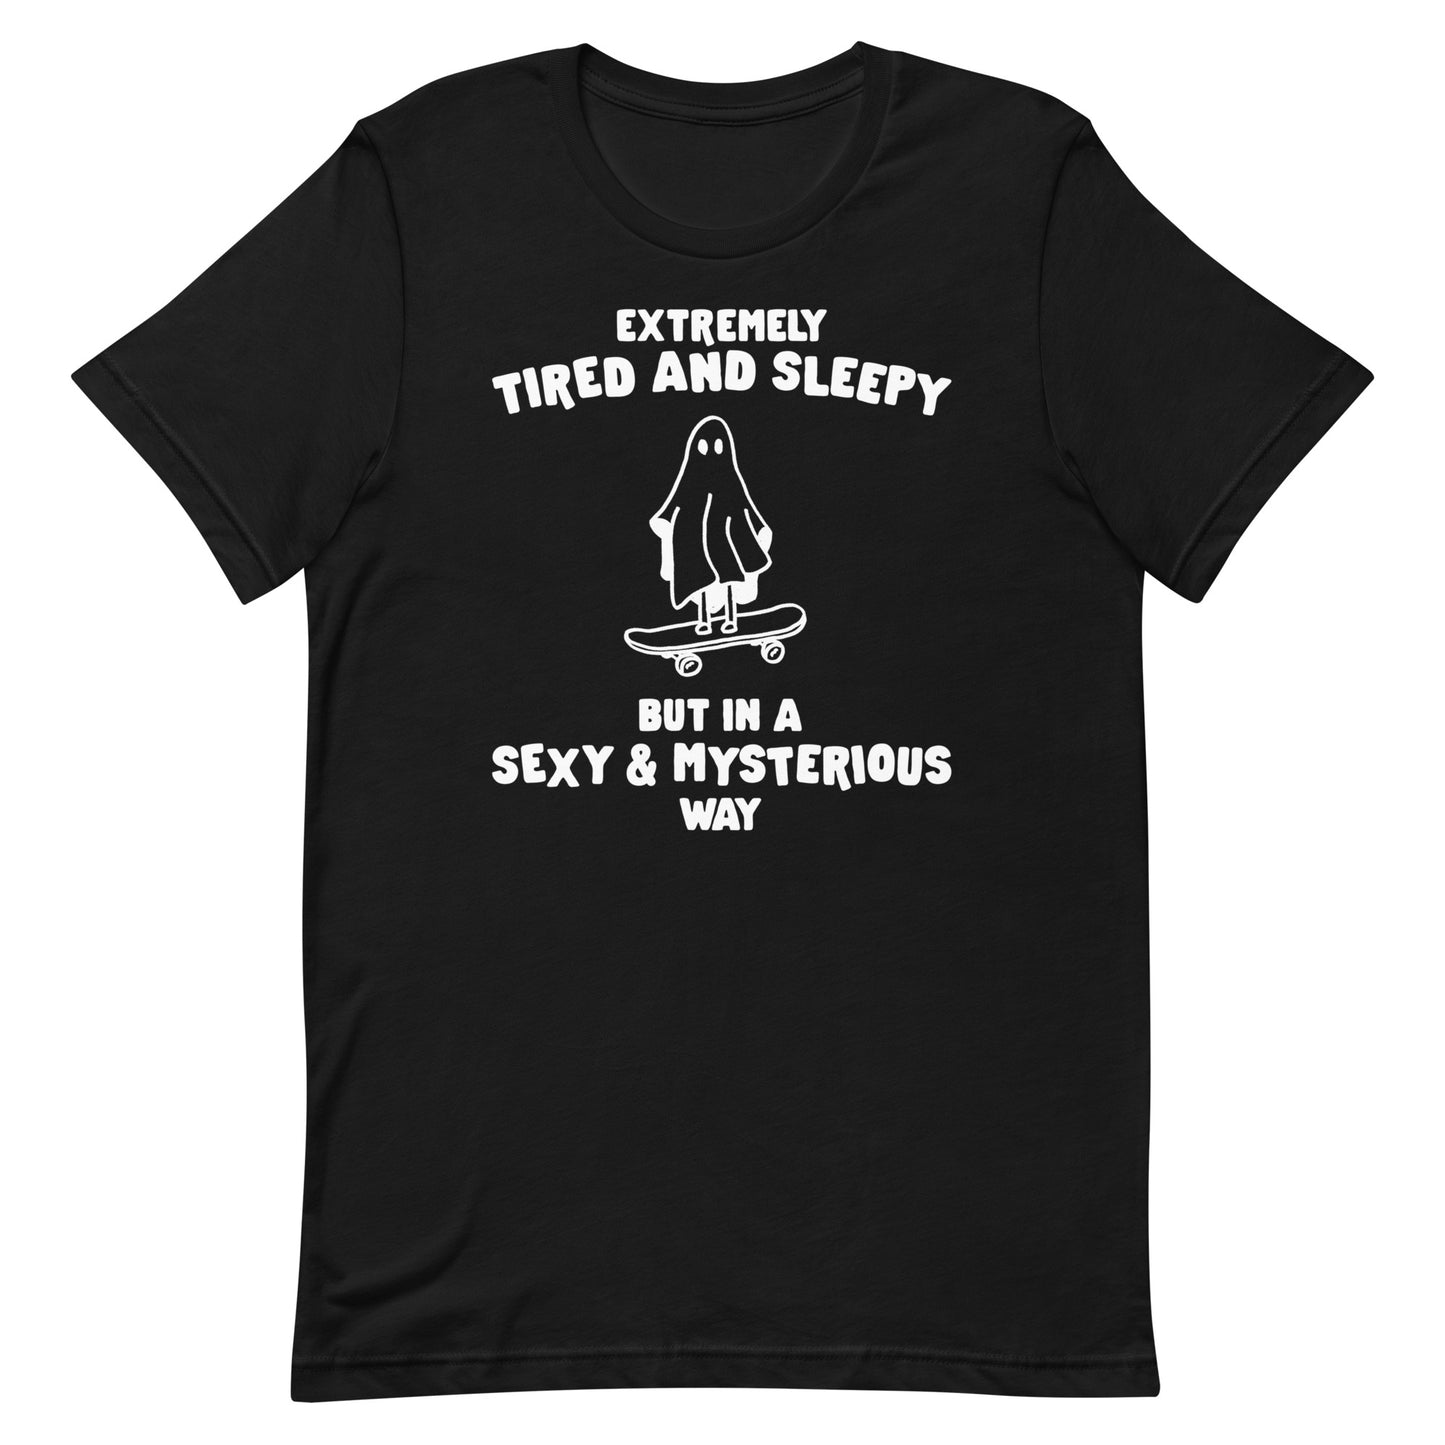 Tired & Sleepy in a Sexy & Mysterious Way Unisex t-shirt